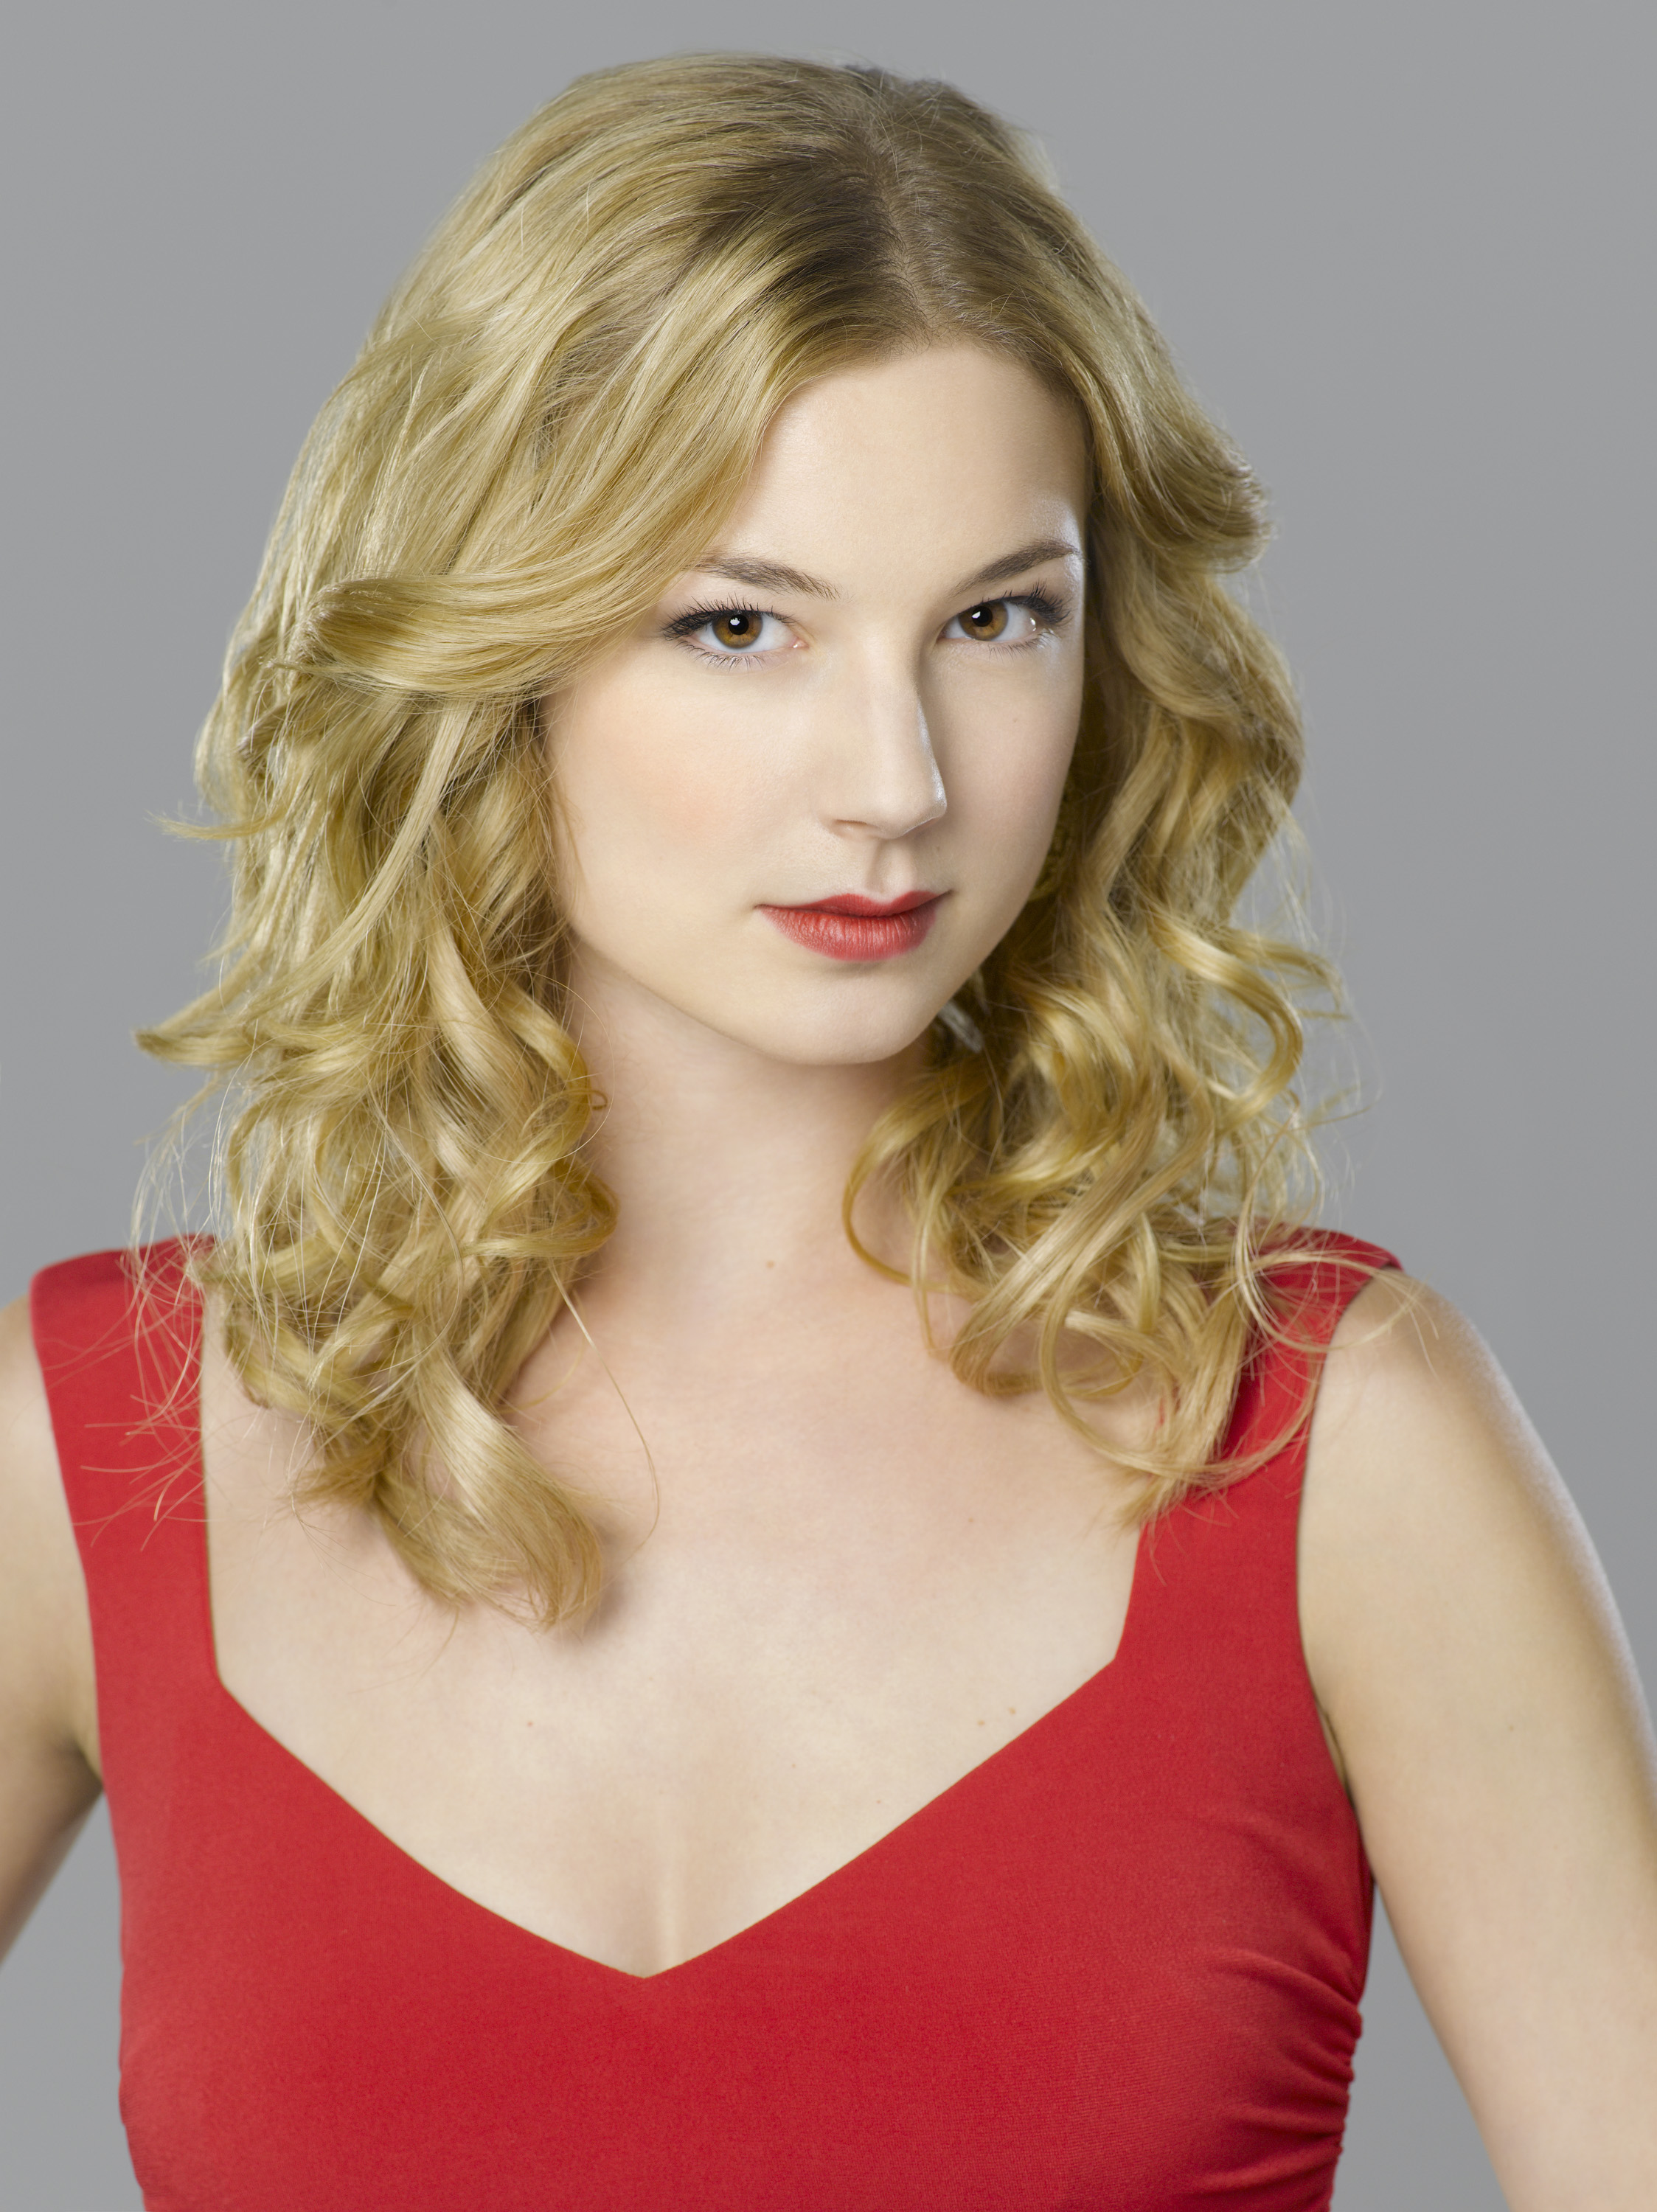 65+ Hot Pictures Of Emily VanCamp- Sharon Carter In Marvel Movies | Best Of Comic Books